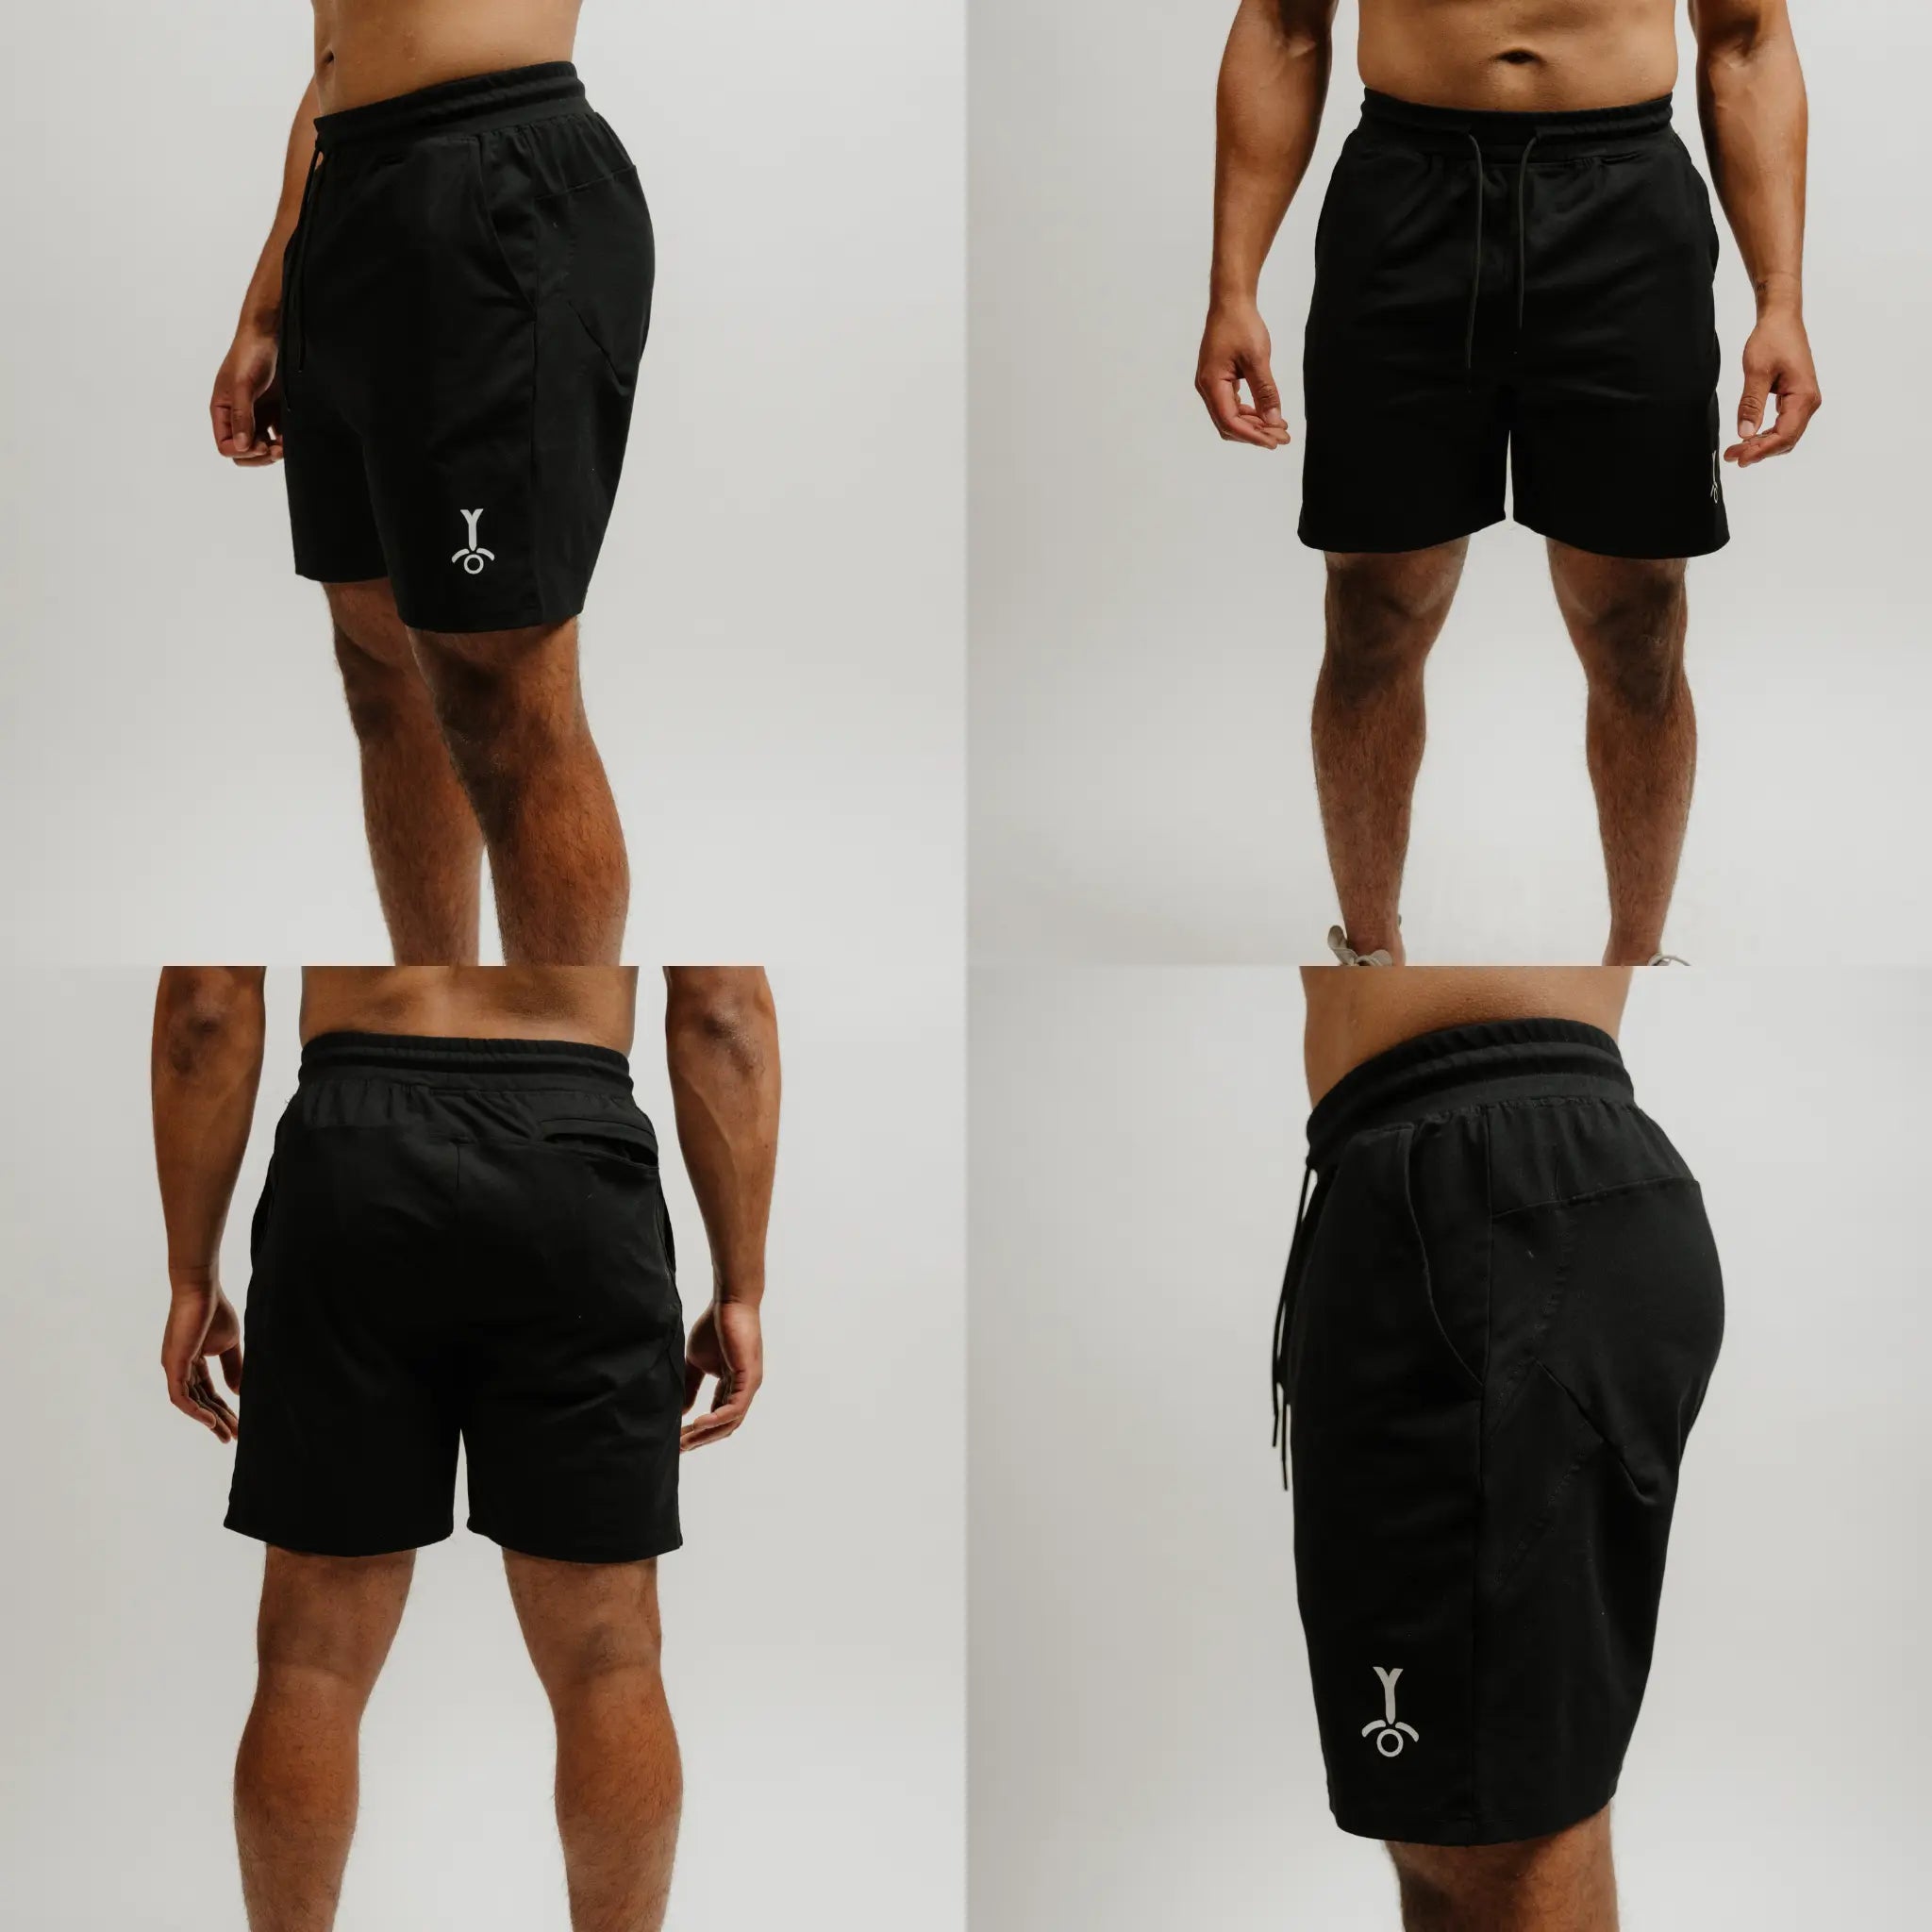 premium blend shorts for comfort and training